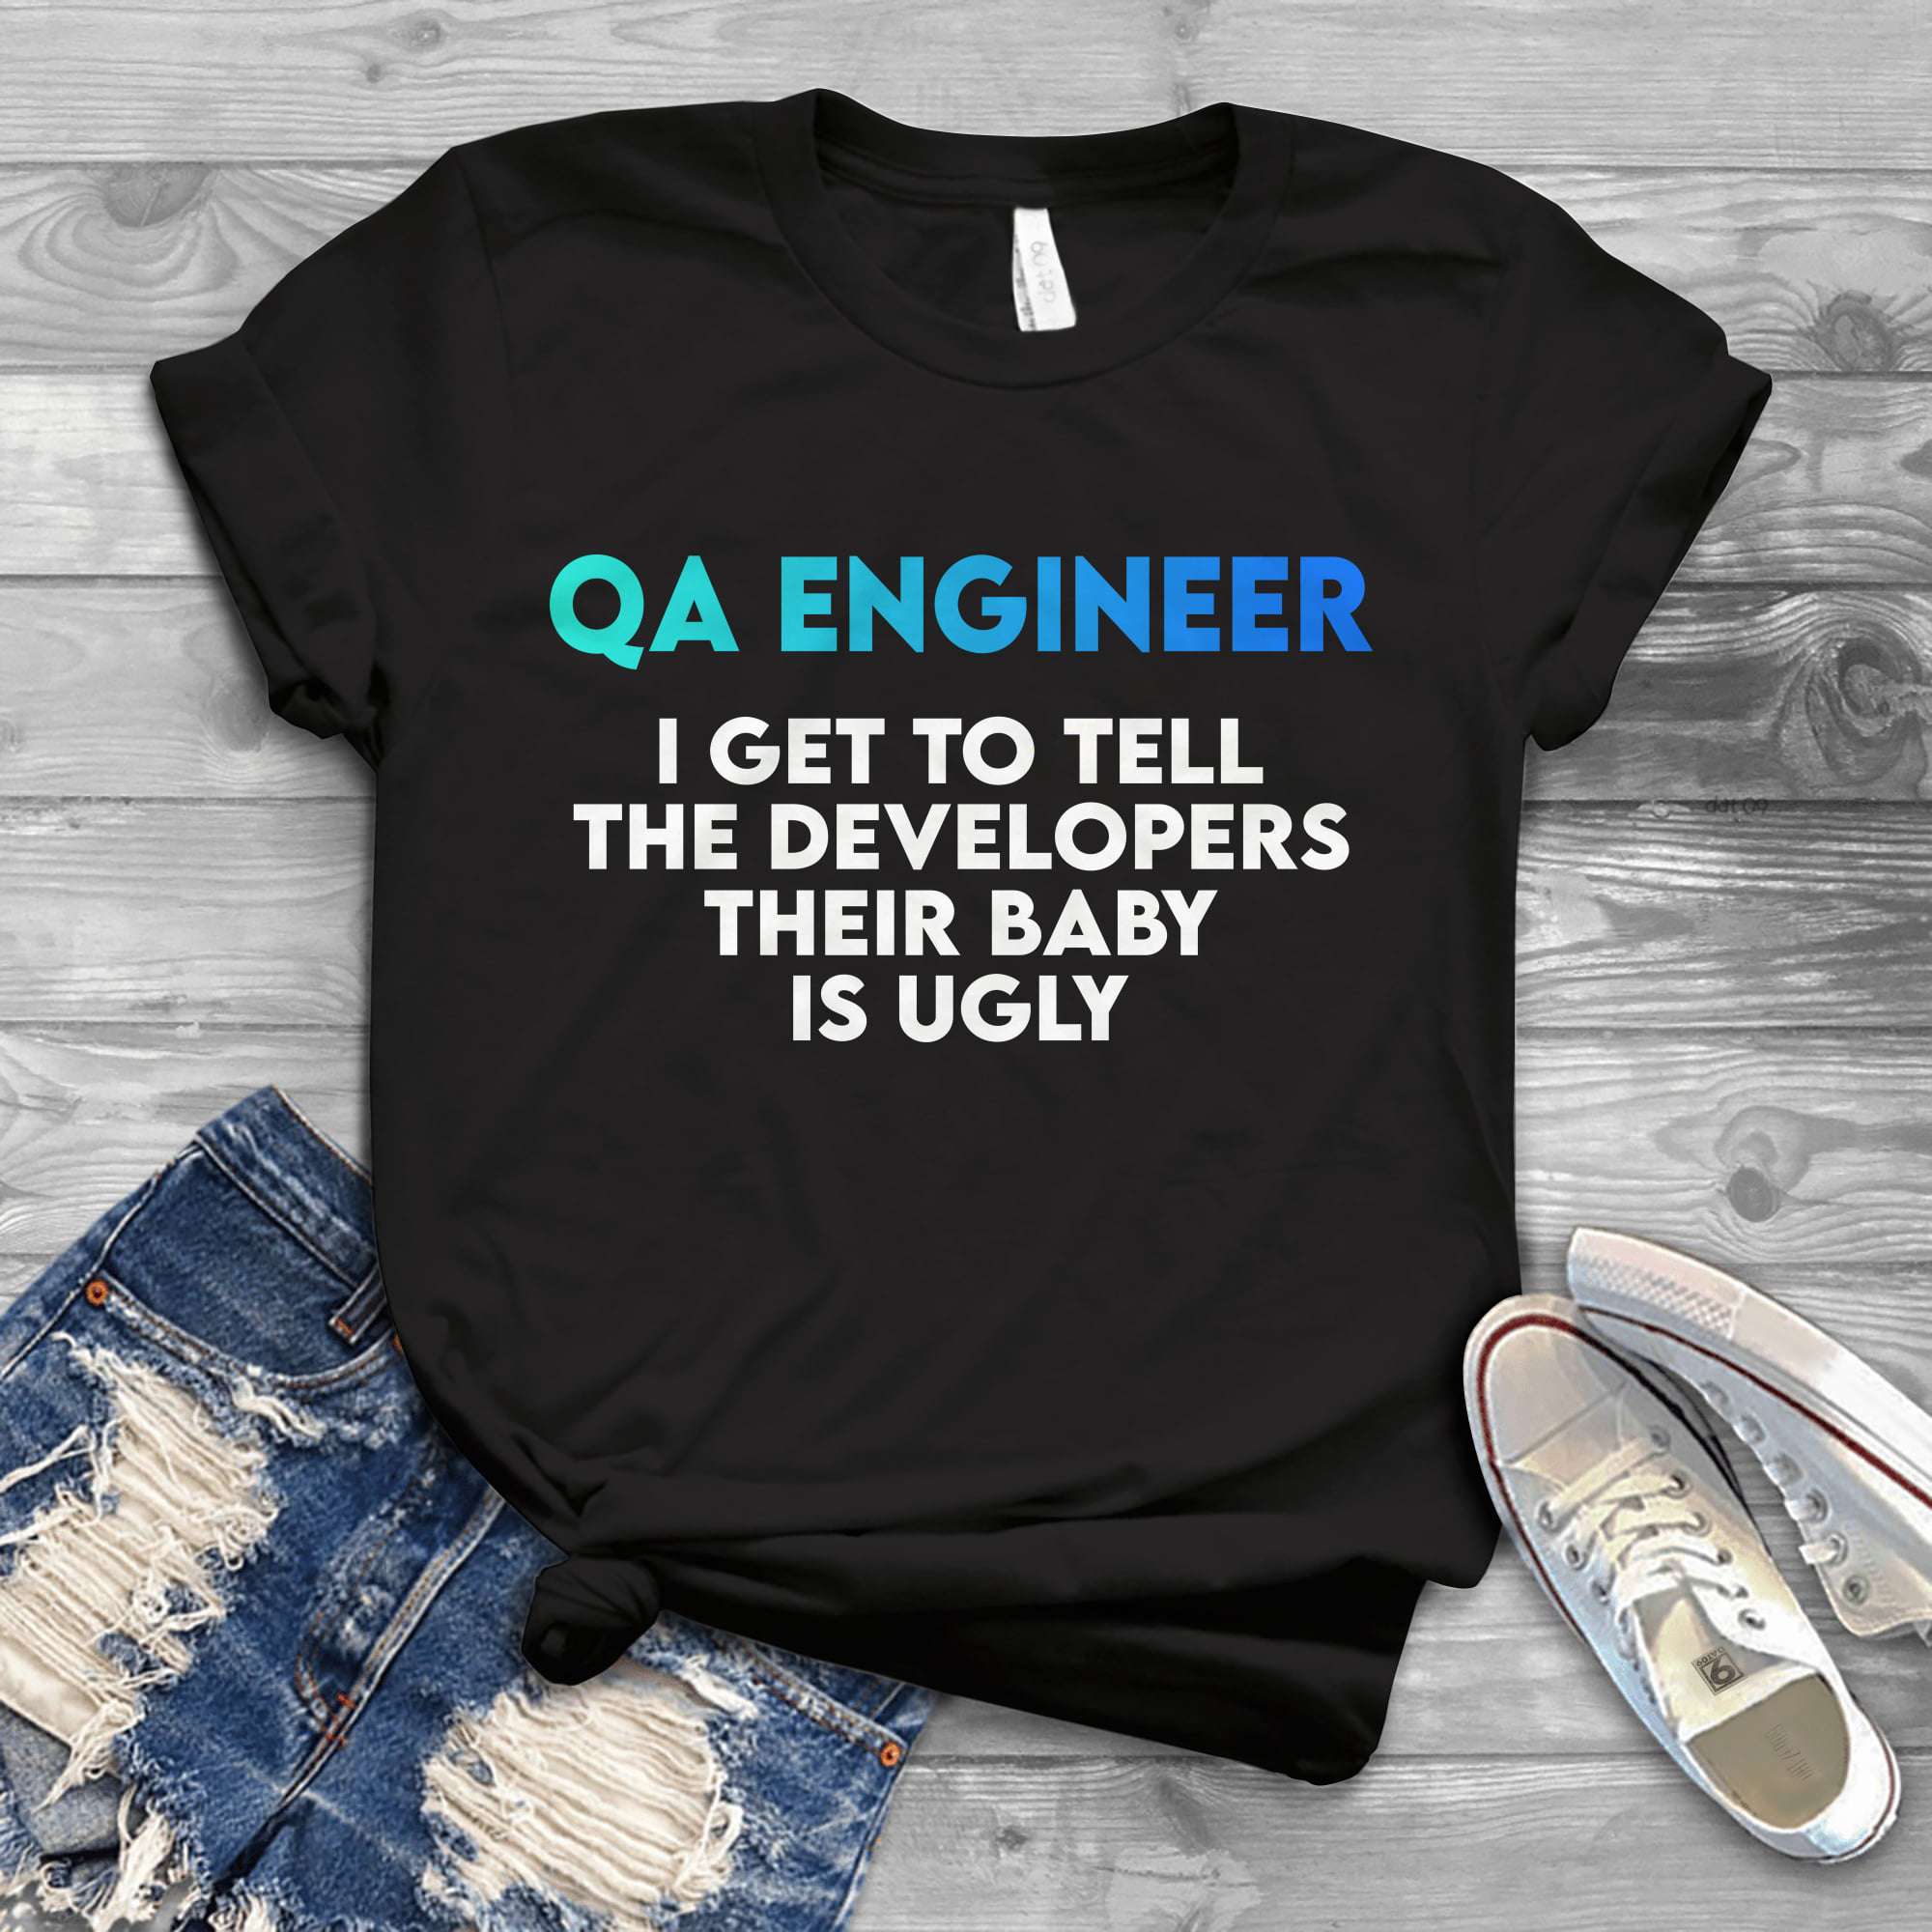 QA Engineer - I get to tell the developers their baby is ugly